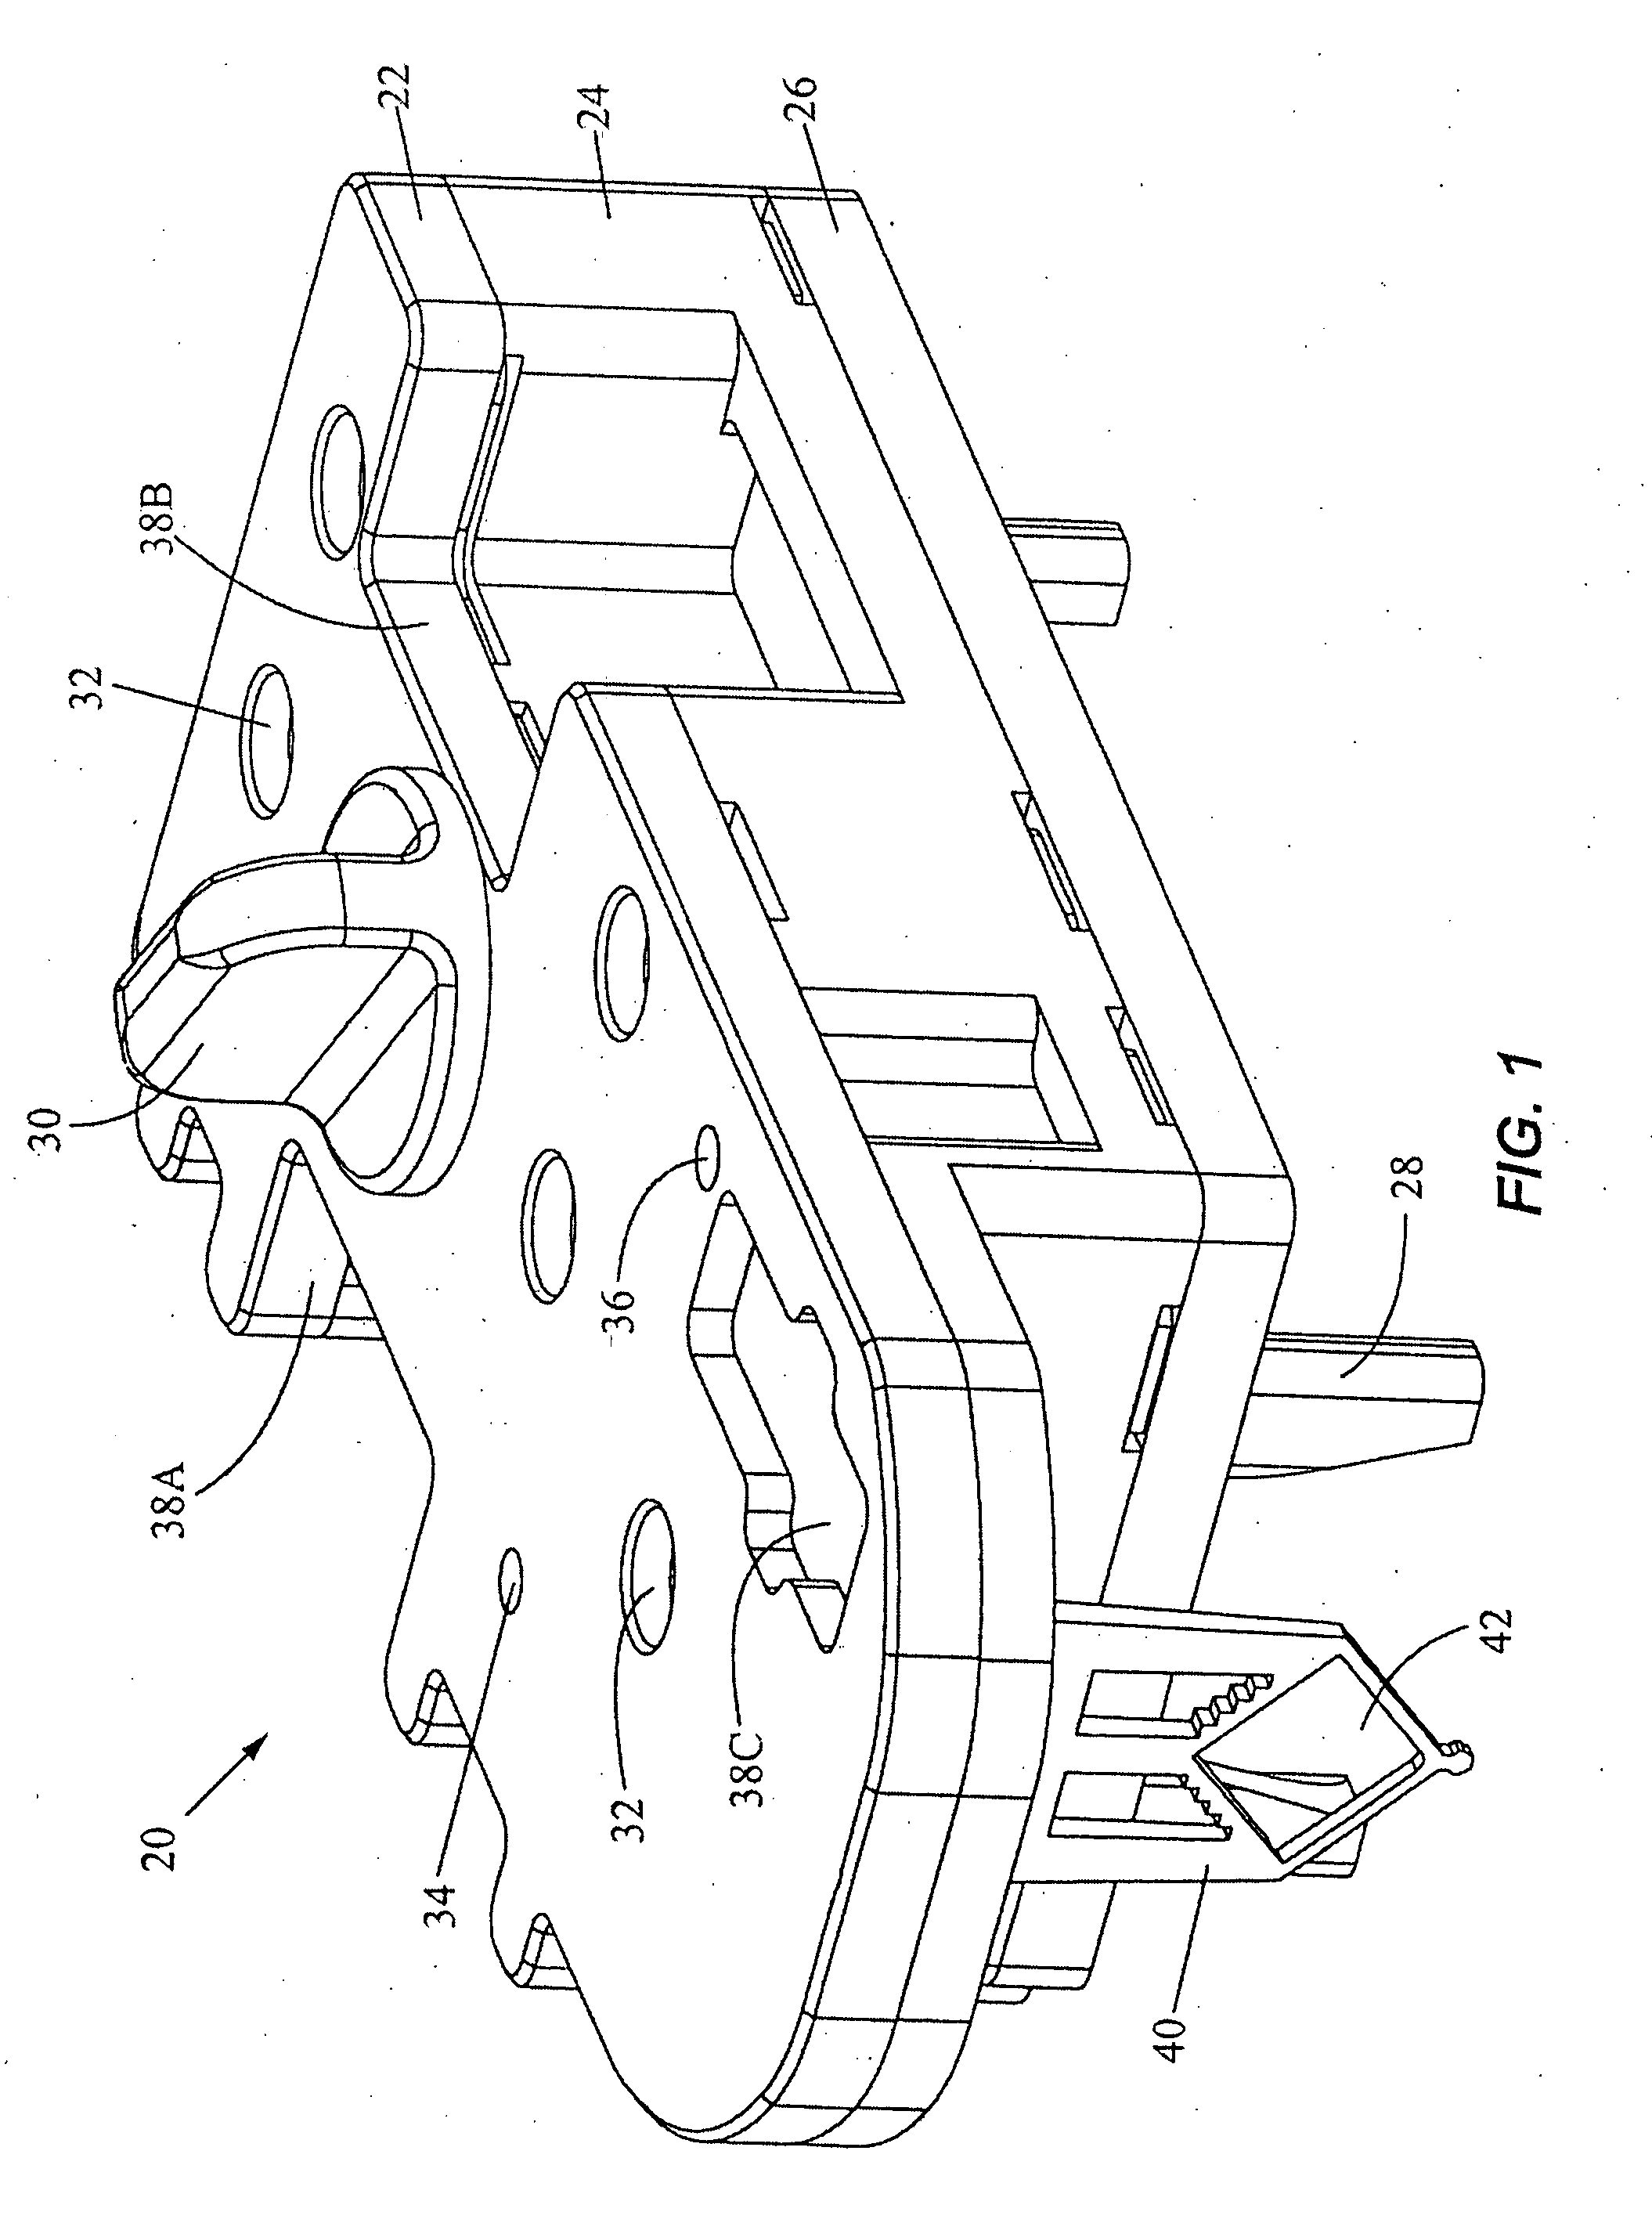 Device for extracting nucleic acid from a sample